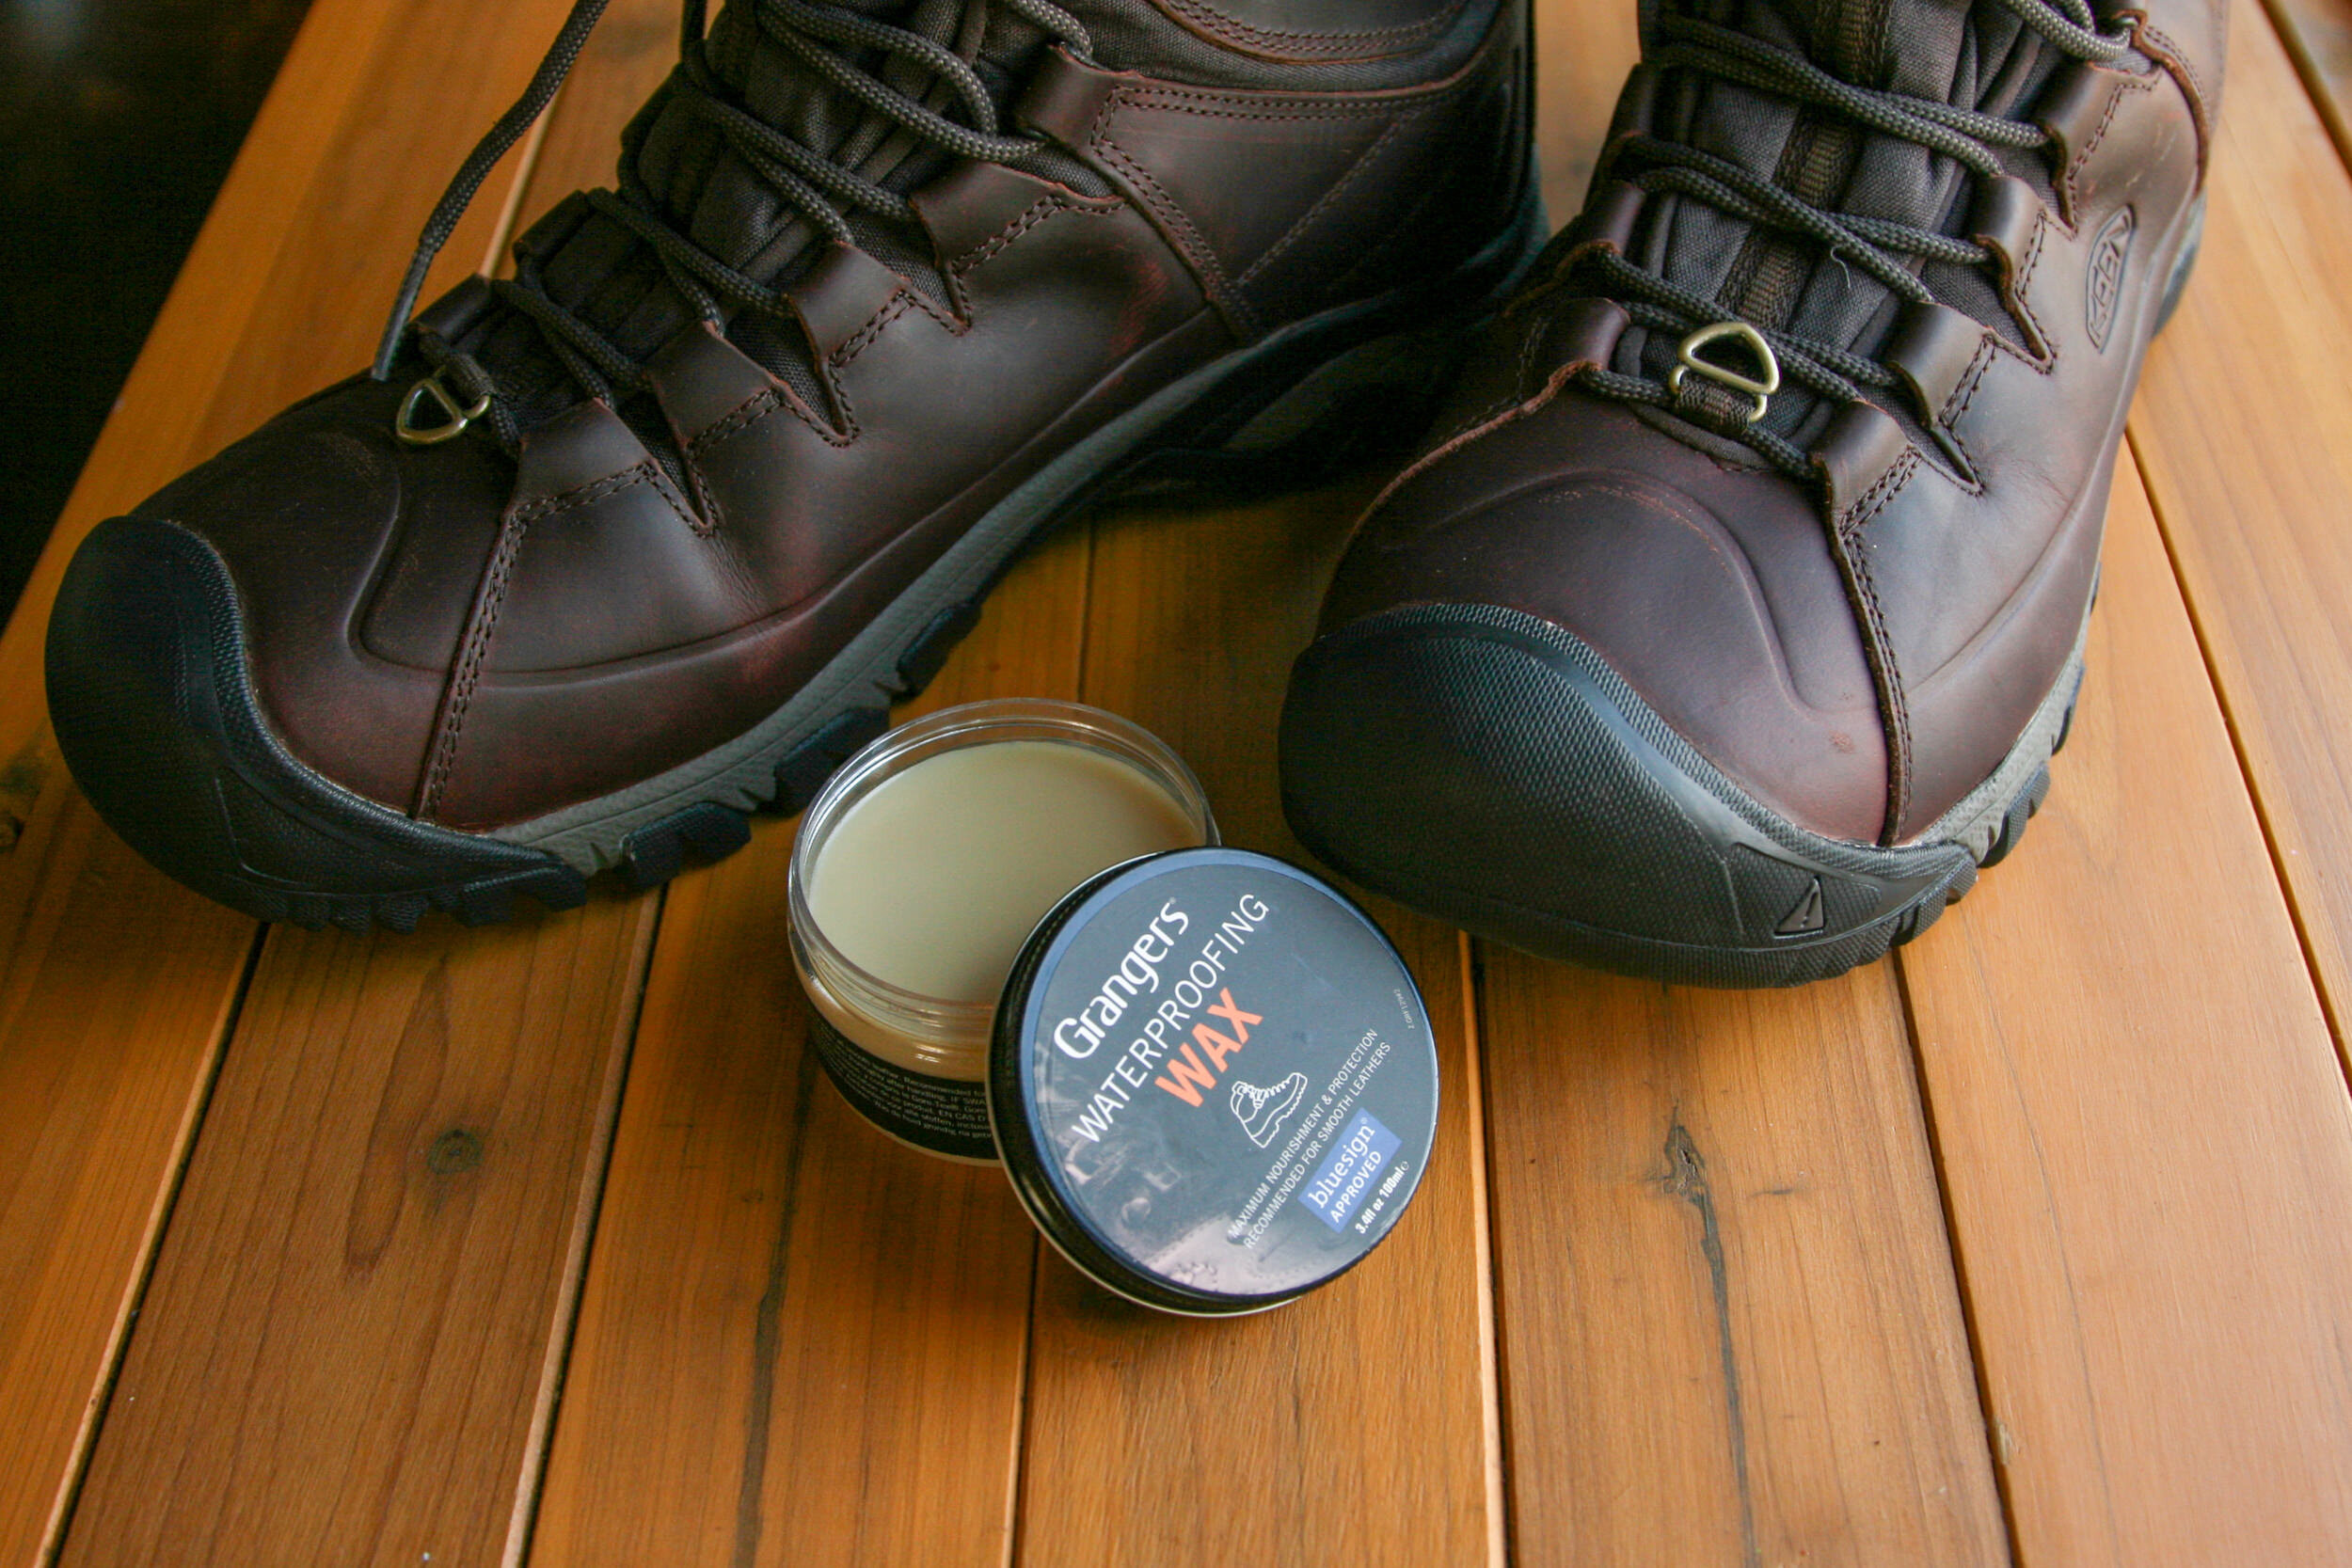 GRANGER’S WATERPROOFING WAX IS GREAT FOR MAINTAINING DARKER SMOOTH LEATHER BOOTS